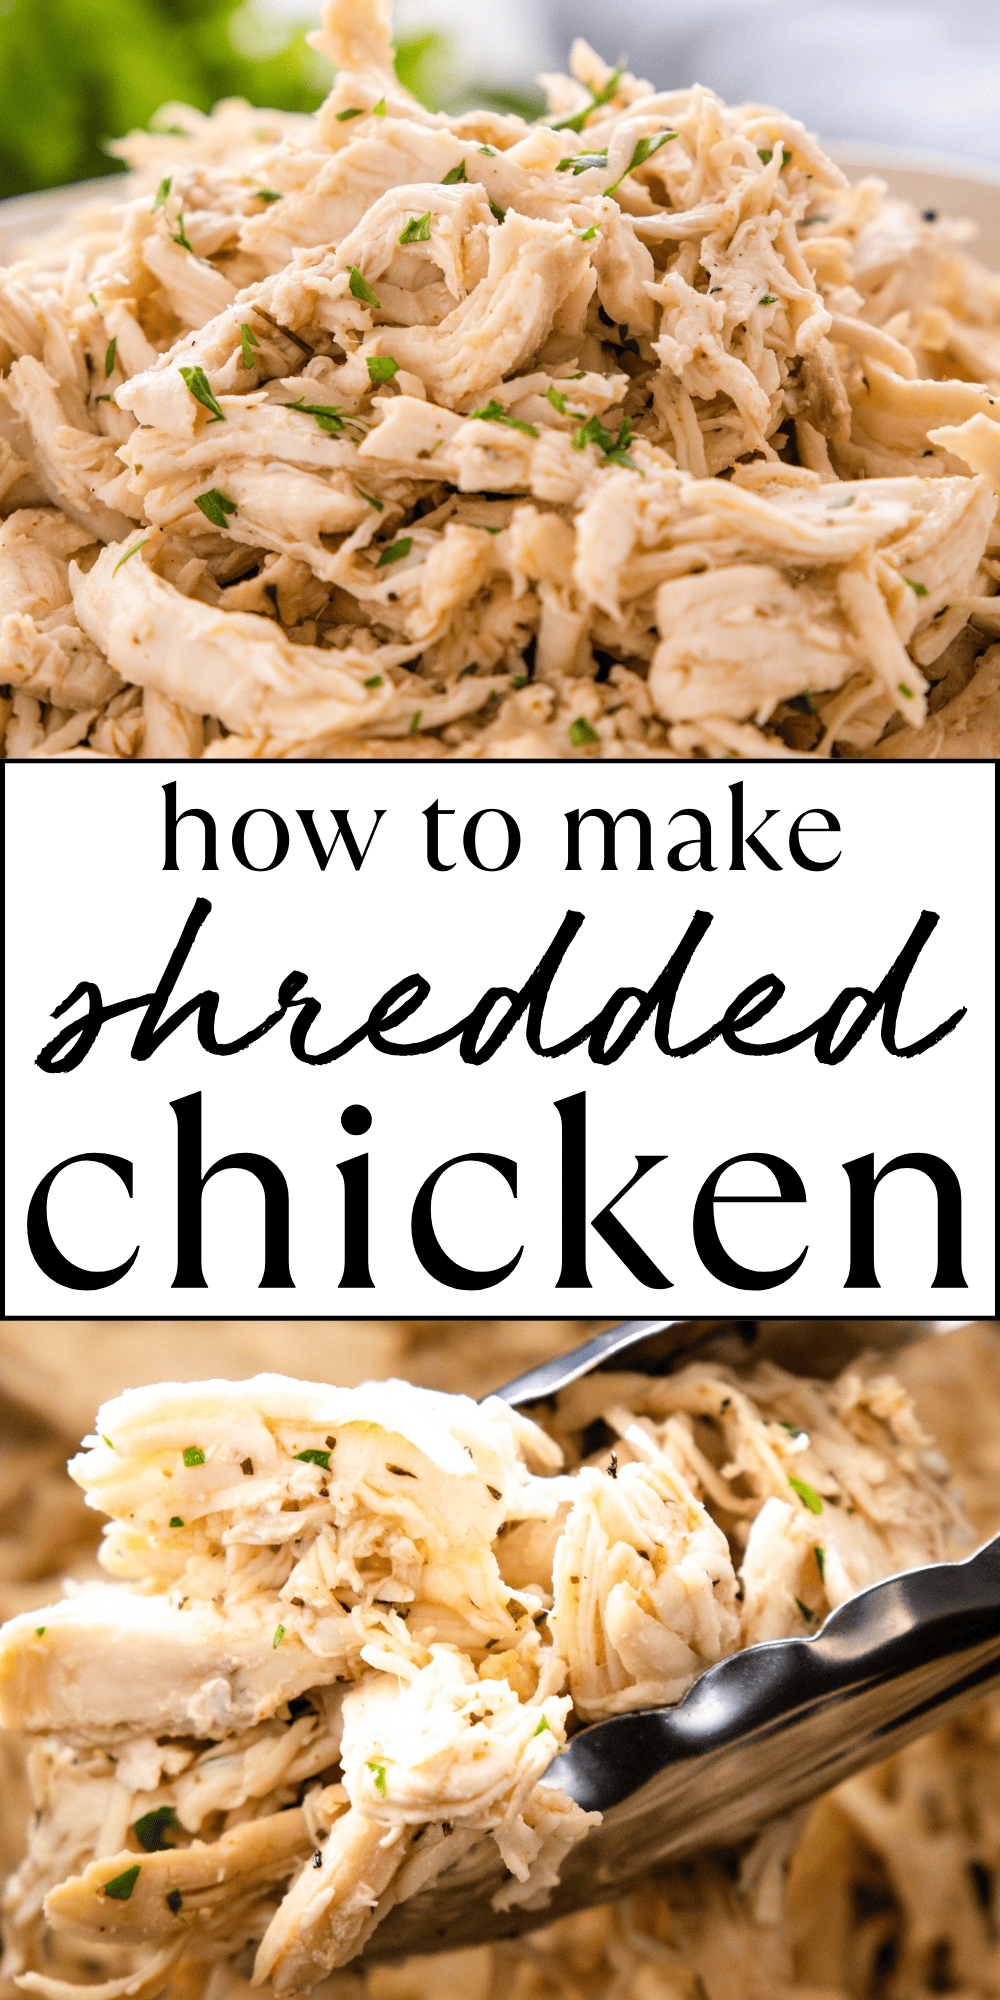 This Shredded Chicken recipe is the ultimate guide to moist and juicy crockpot shredded chicken, instant pot shredded chicken, and stovetop poached chicken for shredding. We'll show you how to make quick and easy shredded chicken for meal prep! Recipe from thebusybaker.ca! #shreddedchicken #easyshreddedchicken #easyprotein #healthydiet #highprotein #lowcarb #instantpotshreddedchicken #crockpotshreddedchicken #easychickenrecipe via @busybakerblog